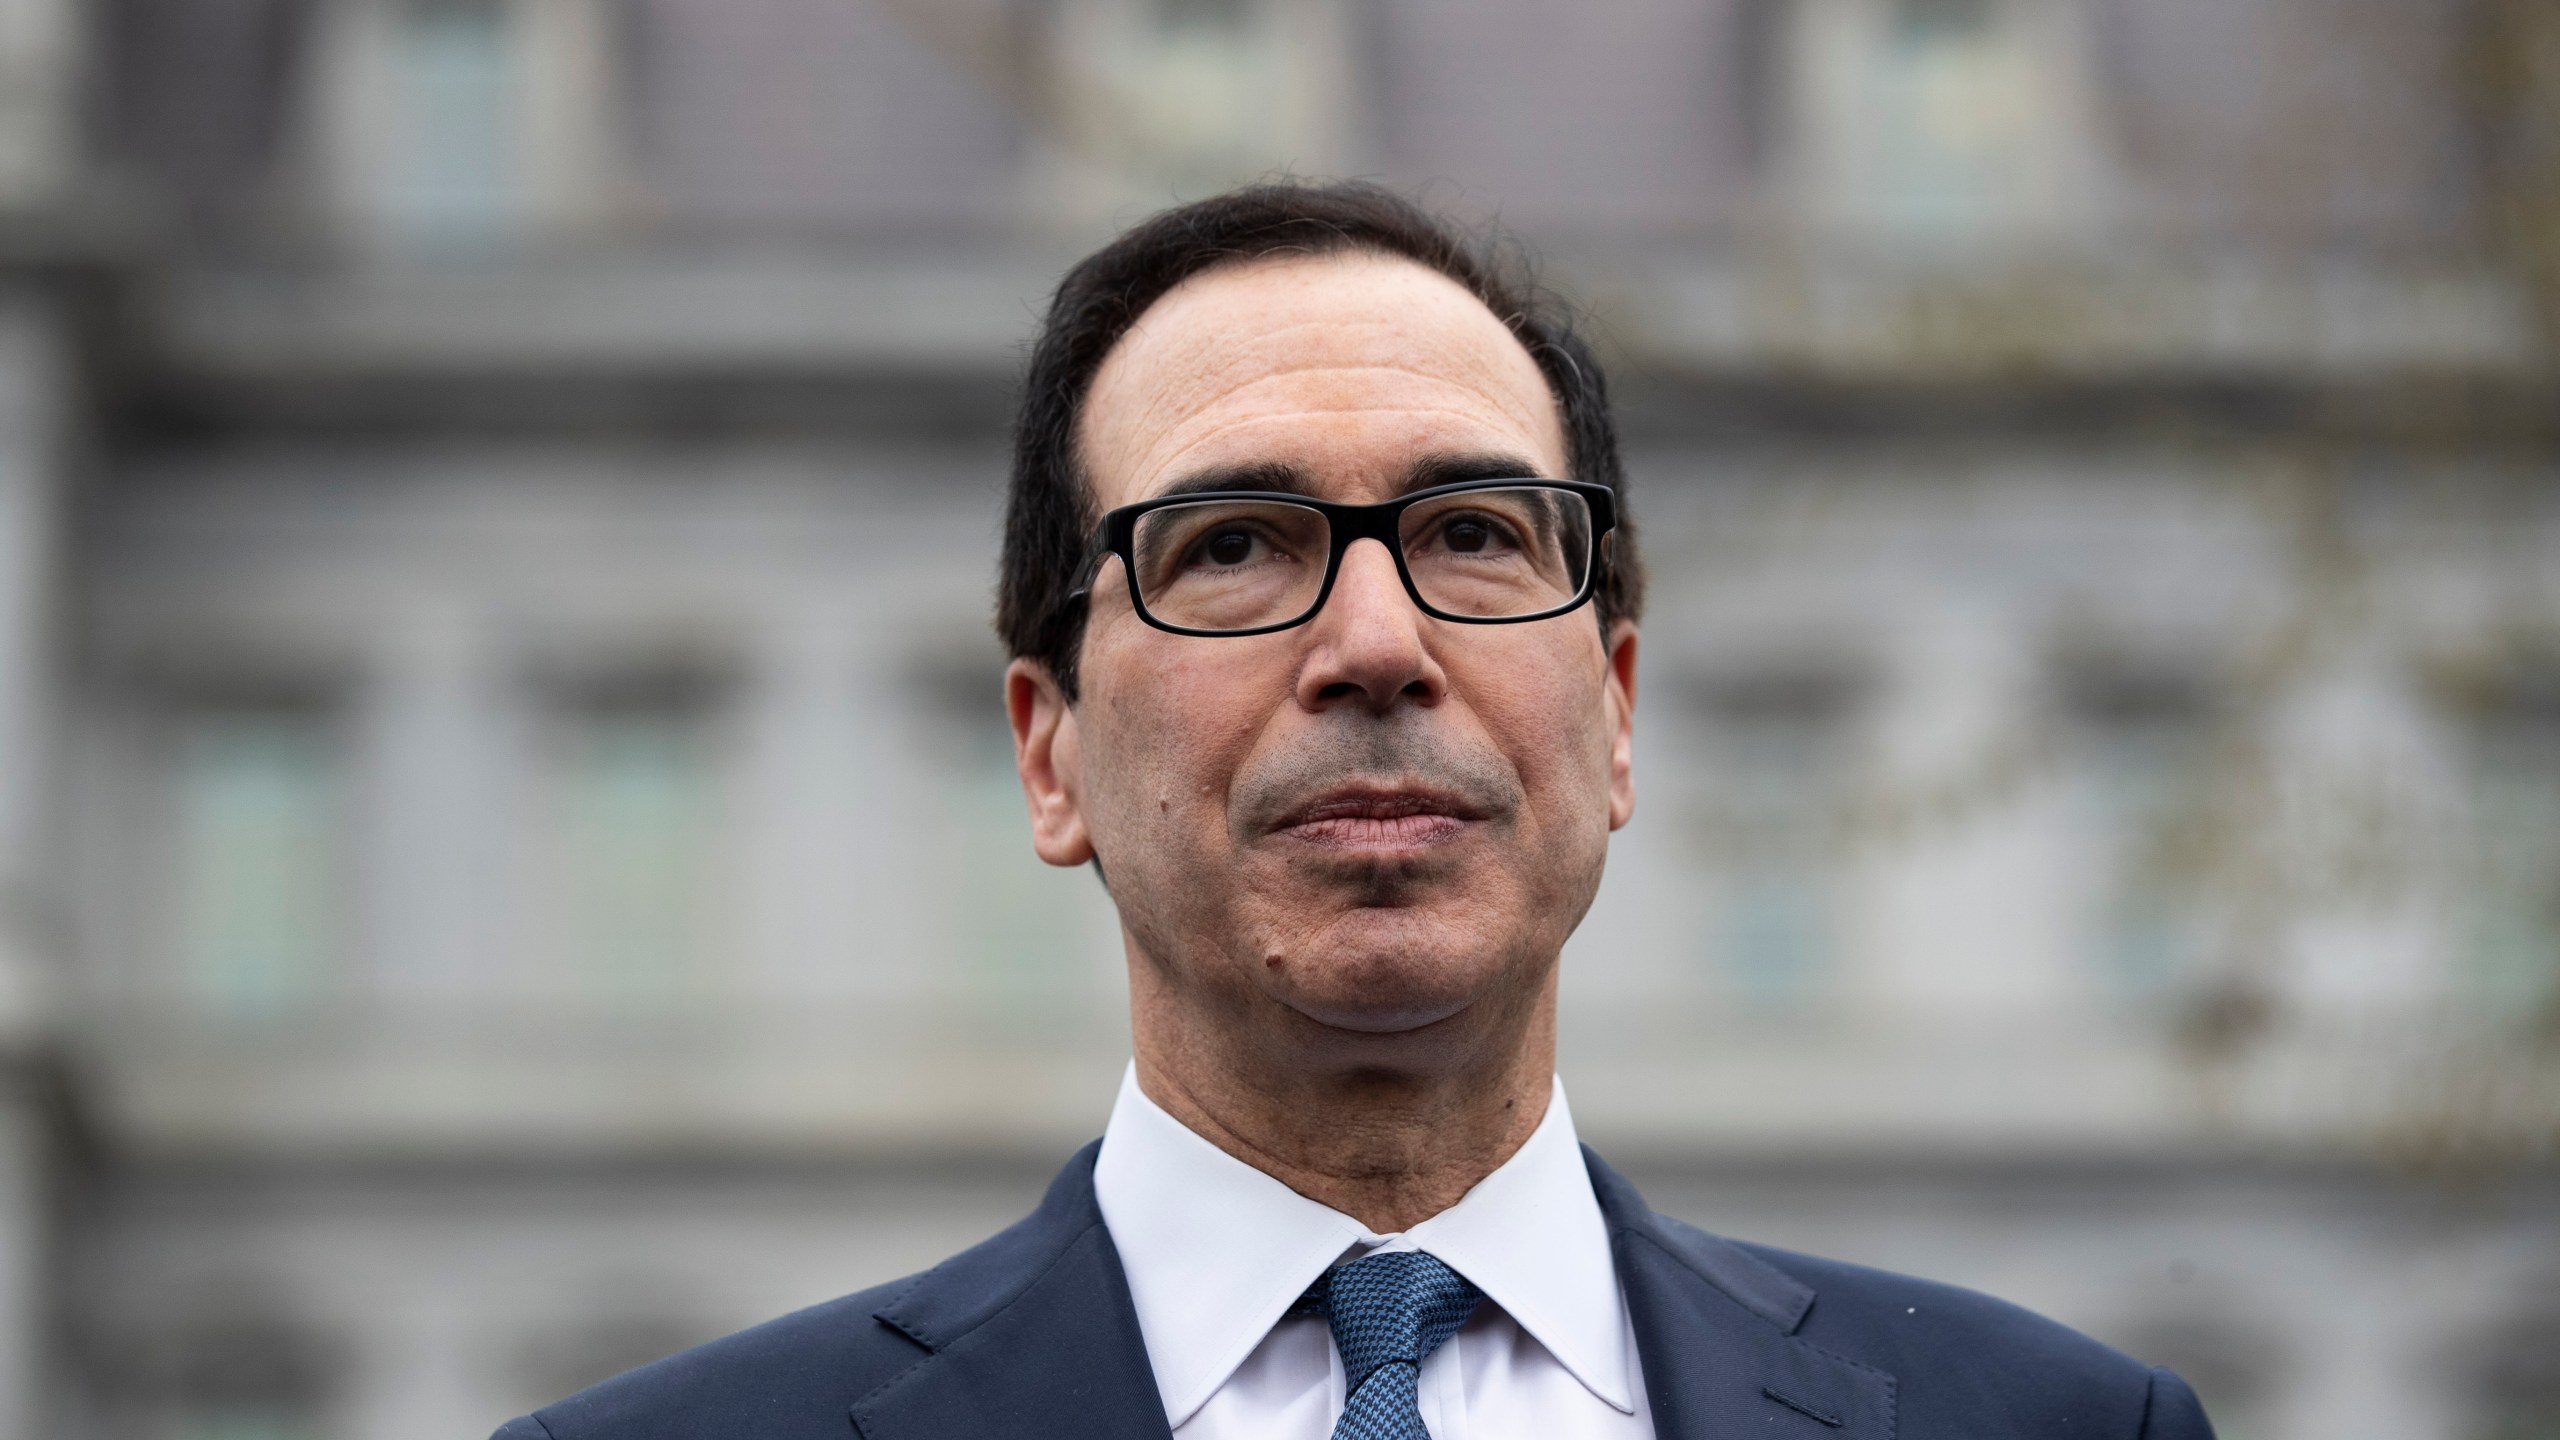 FILE - Former Treasury Secretary Steve Mnuchin speaks with reporters at the White House, March 13, 2020, in Washington. Mnuchin is interested in buying TikTok, just days after his investment firm led a $1 billion deal to inject life into a beaten-down bank.(AP Photo/Alex Brandon, File)